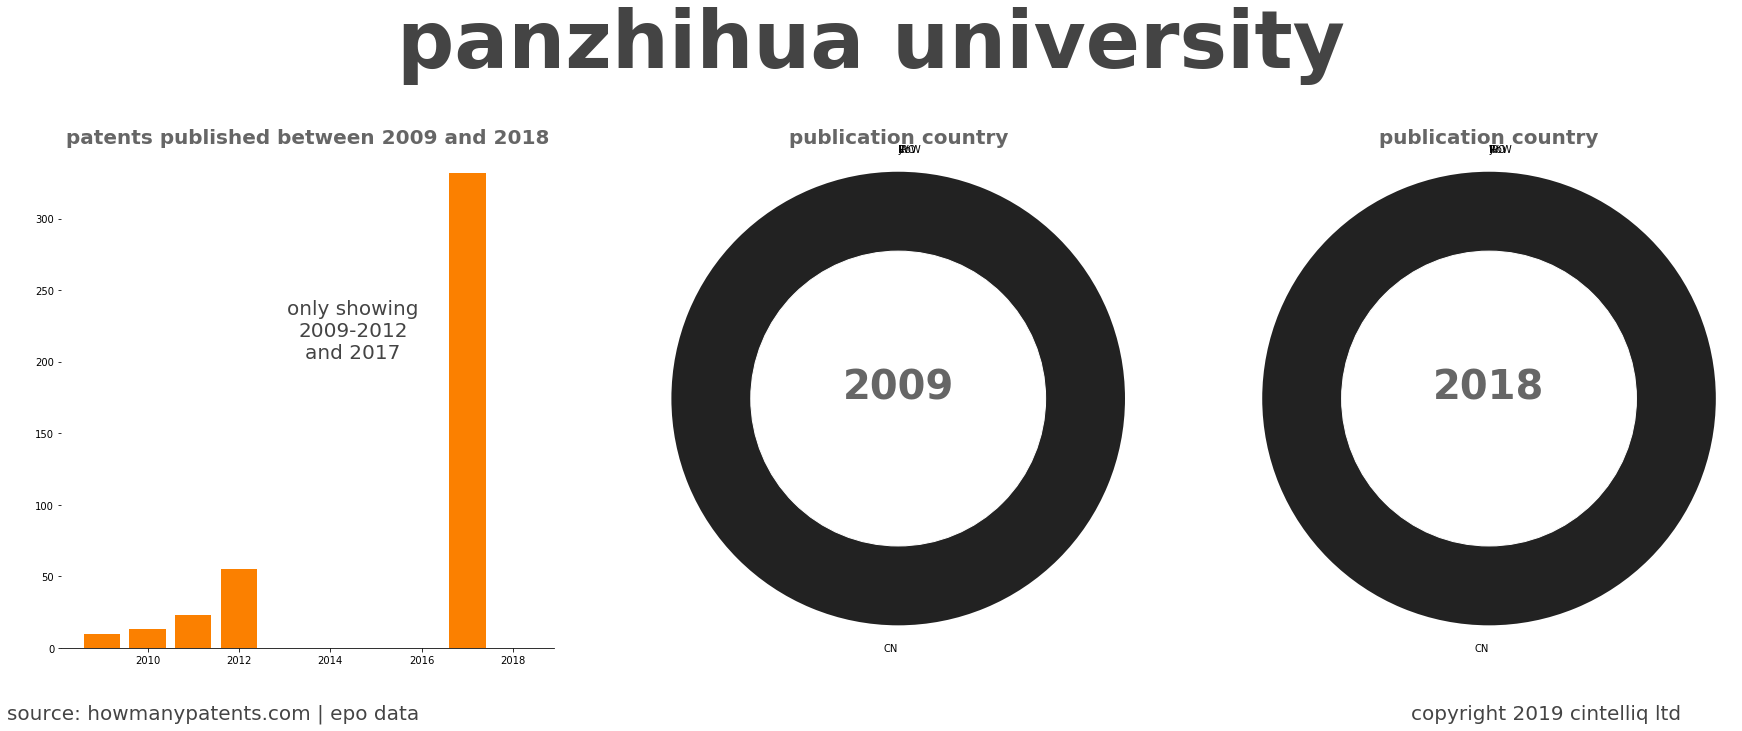 summary of patents for Panzhihua University